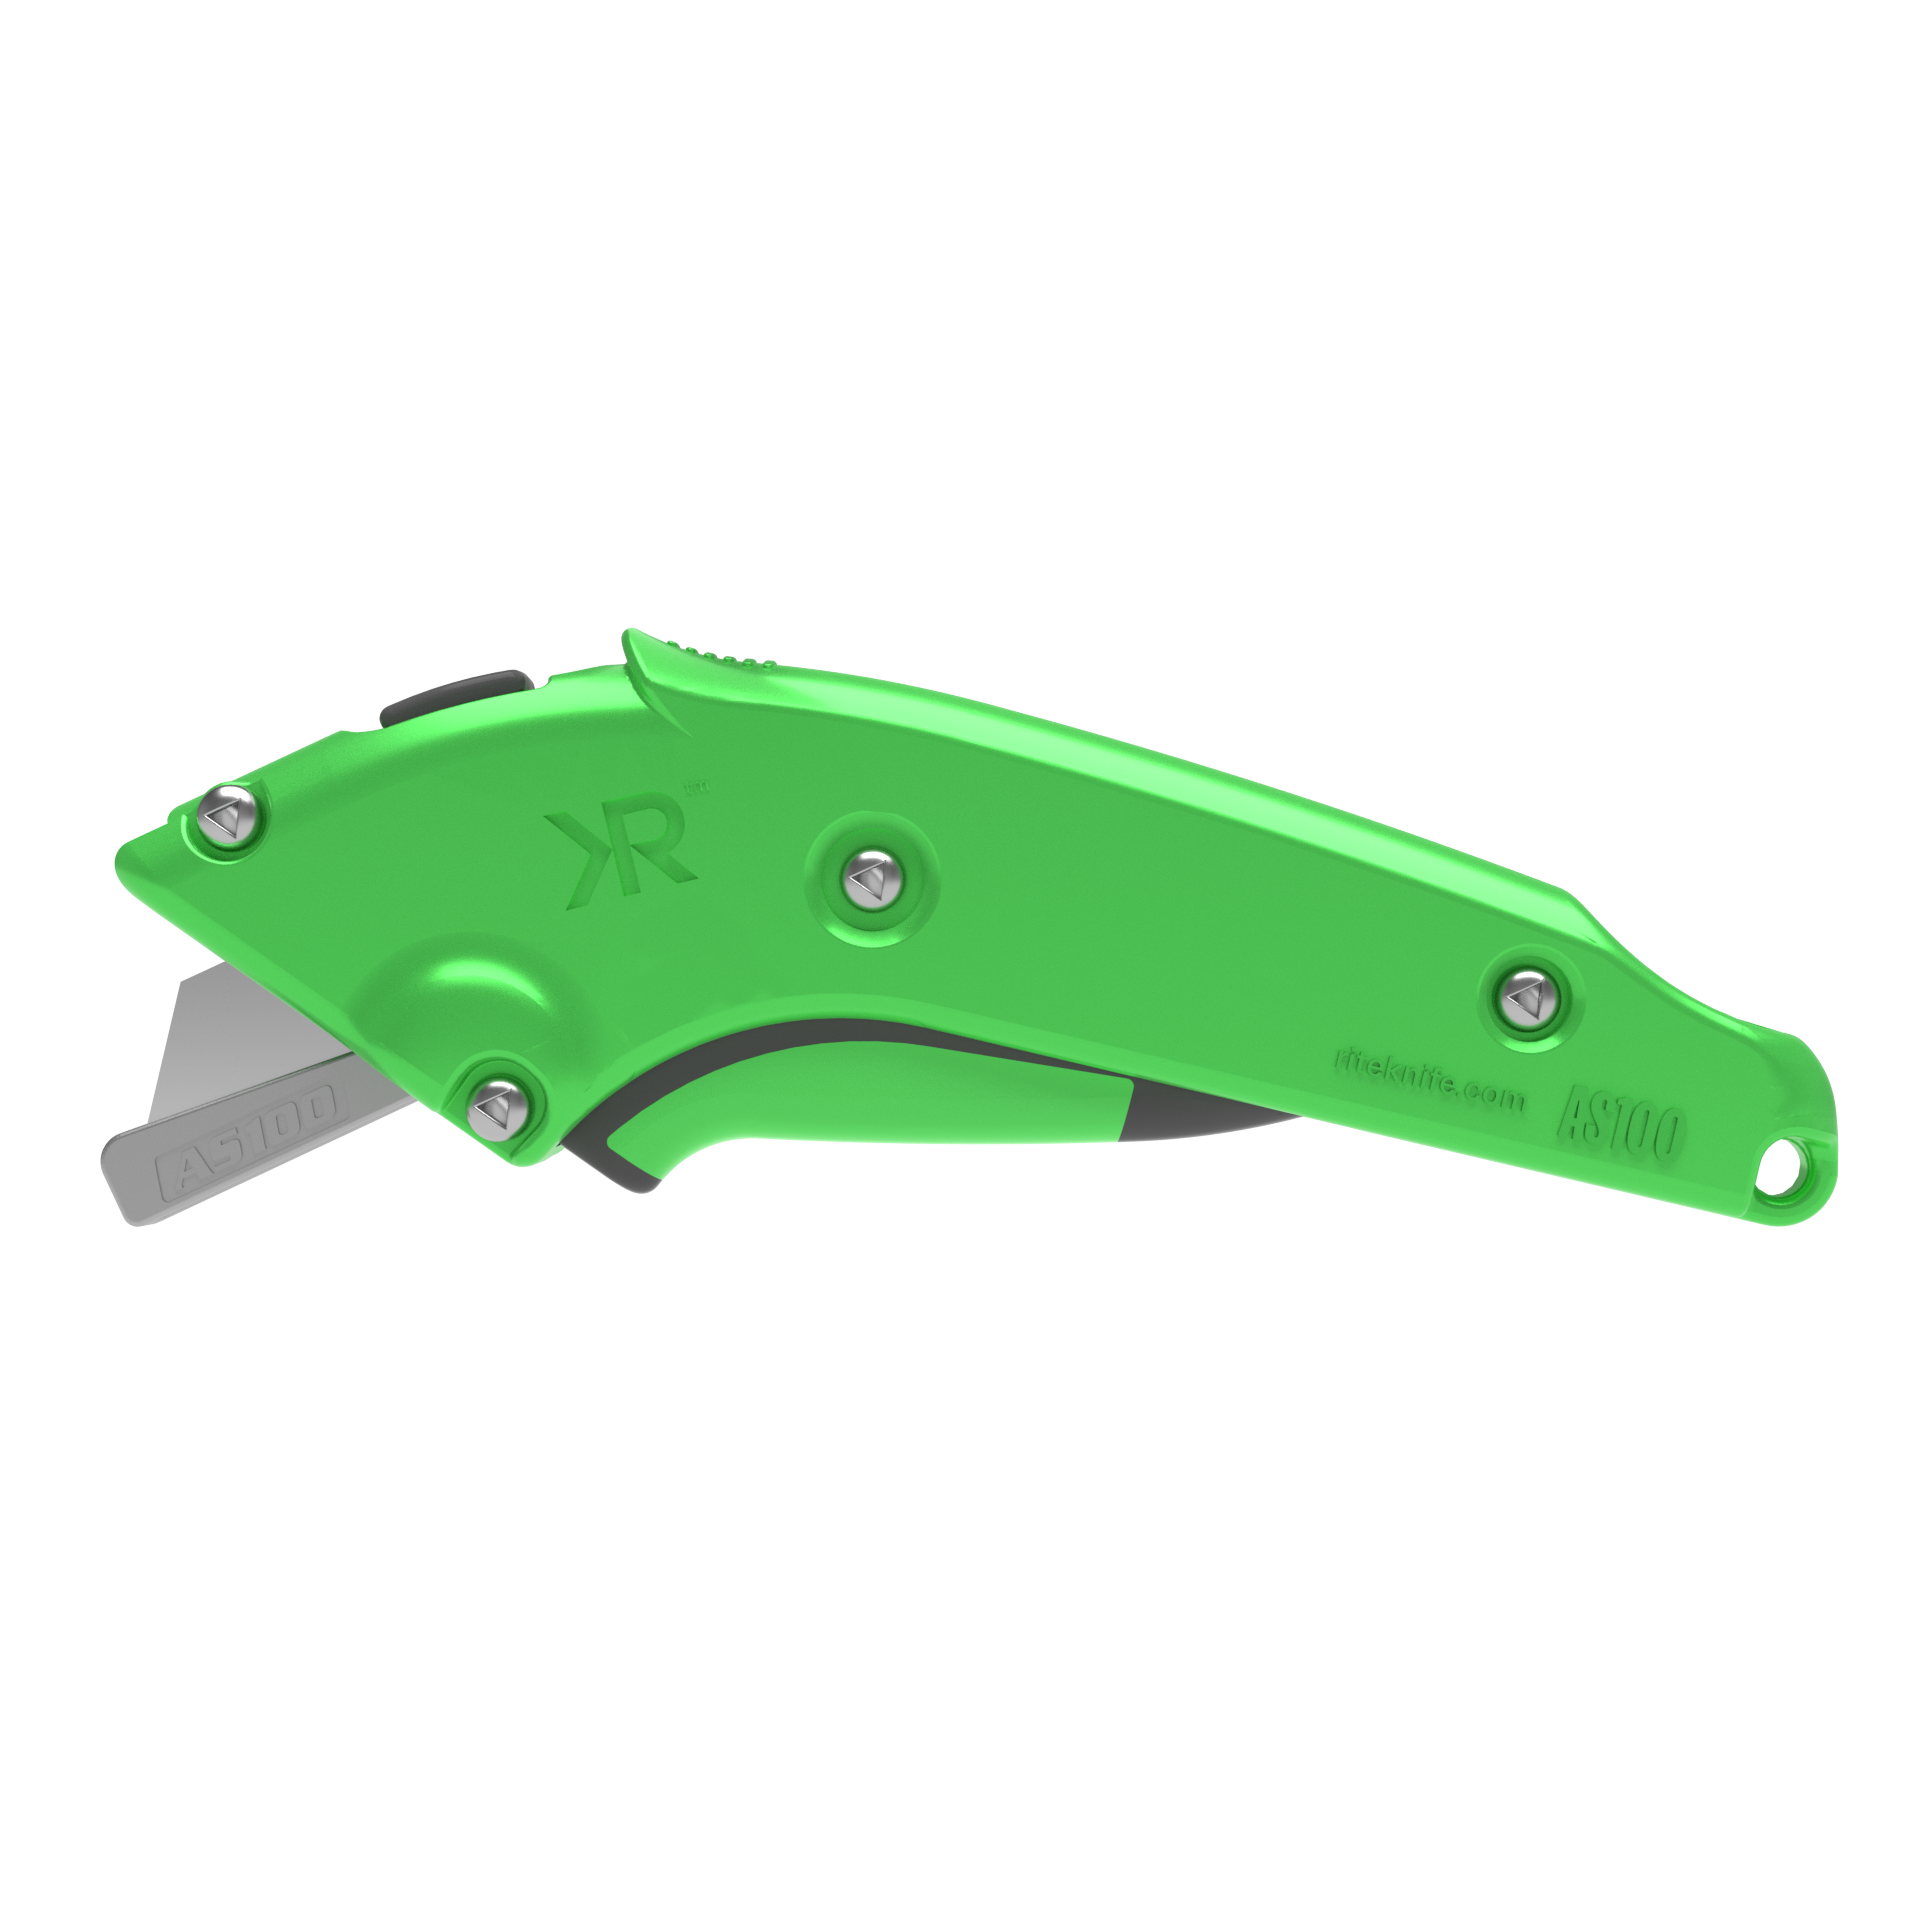 AS100 Auto Rectrable Safety Knife